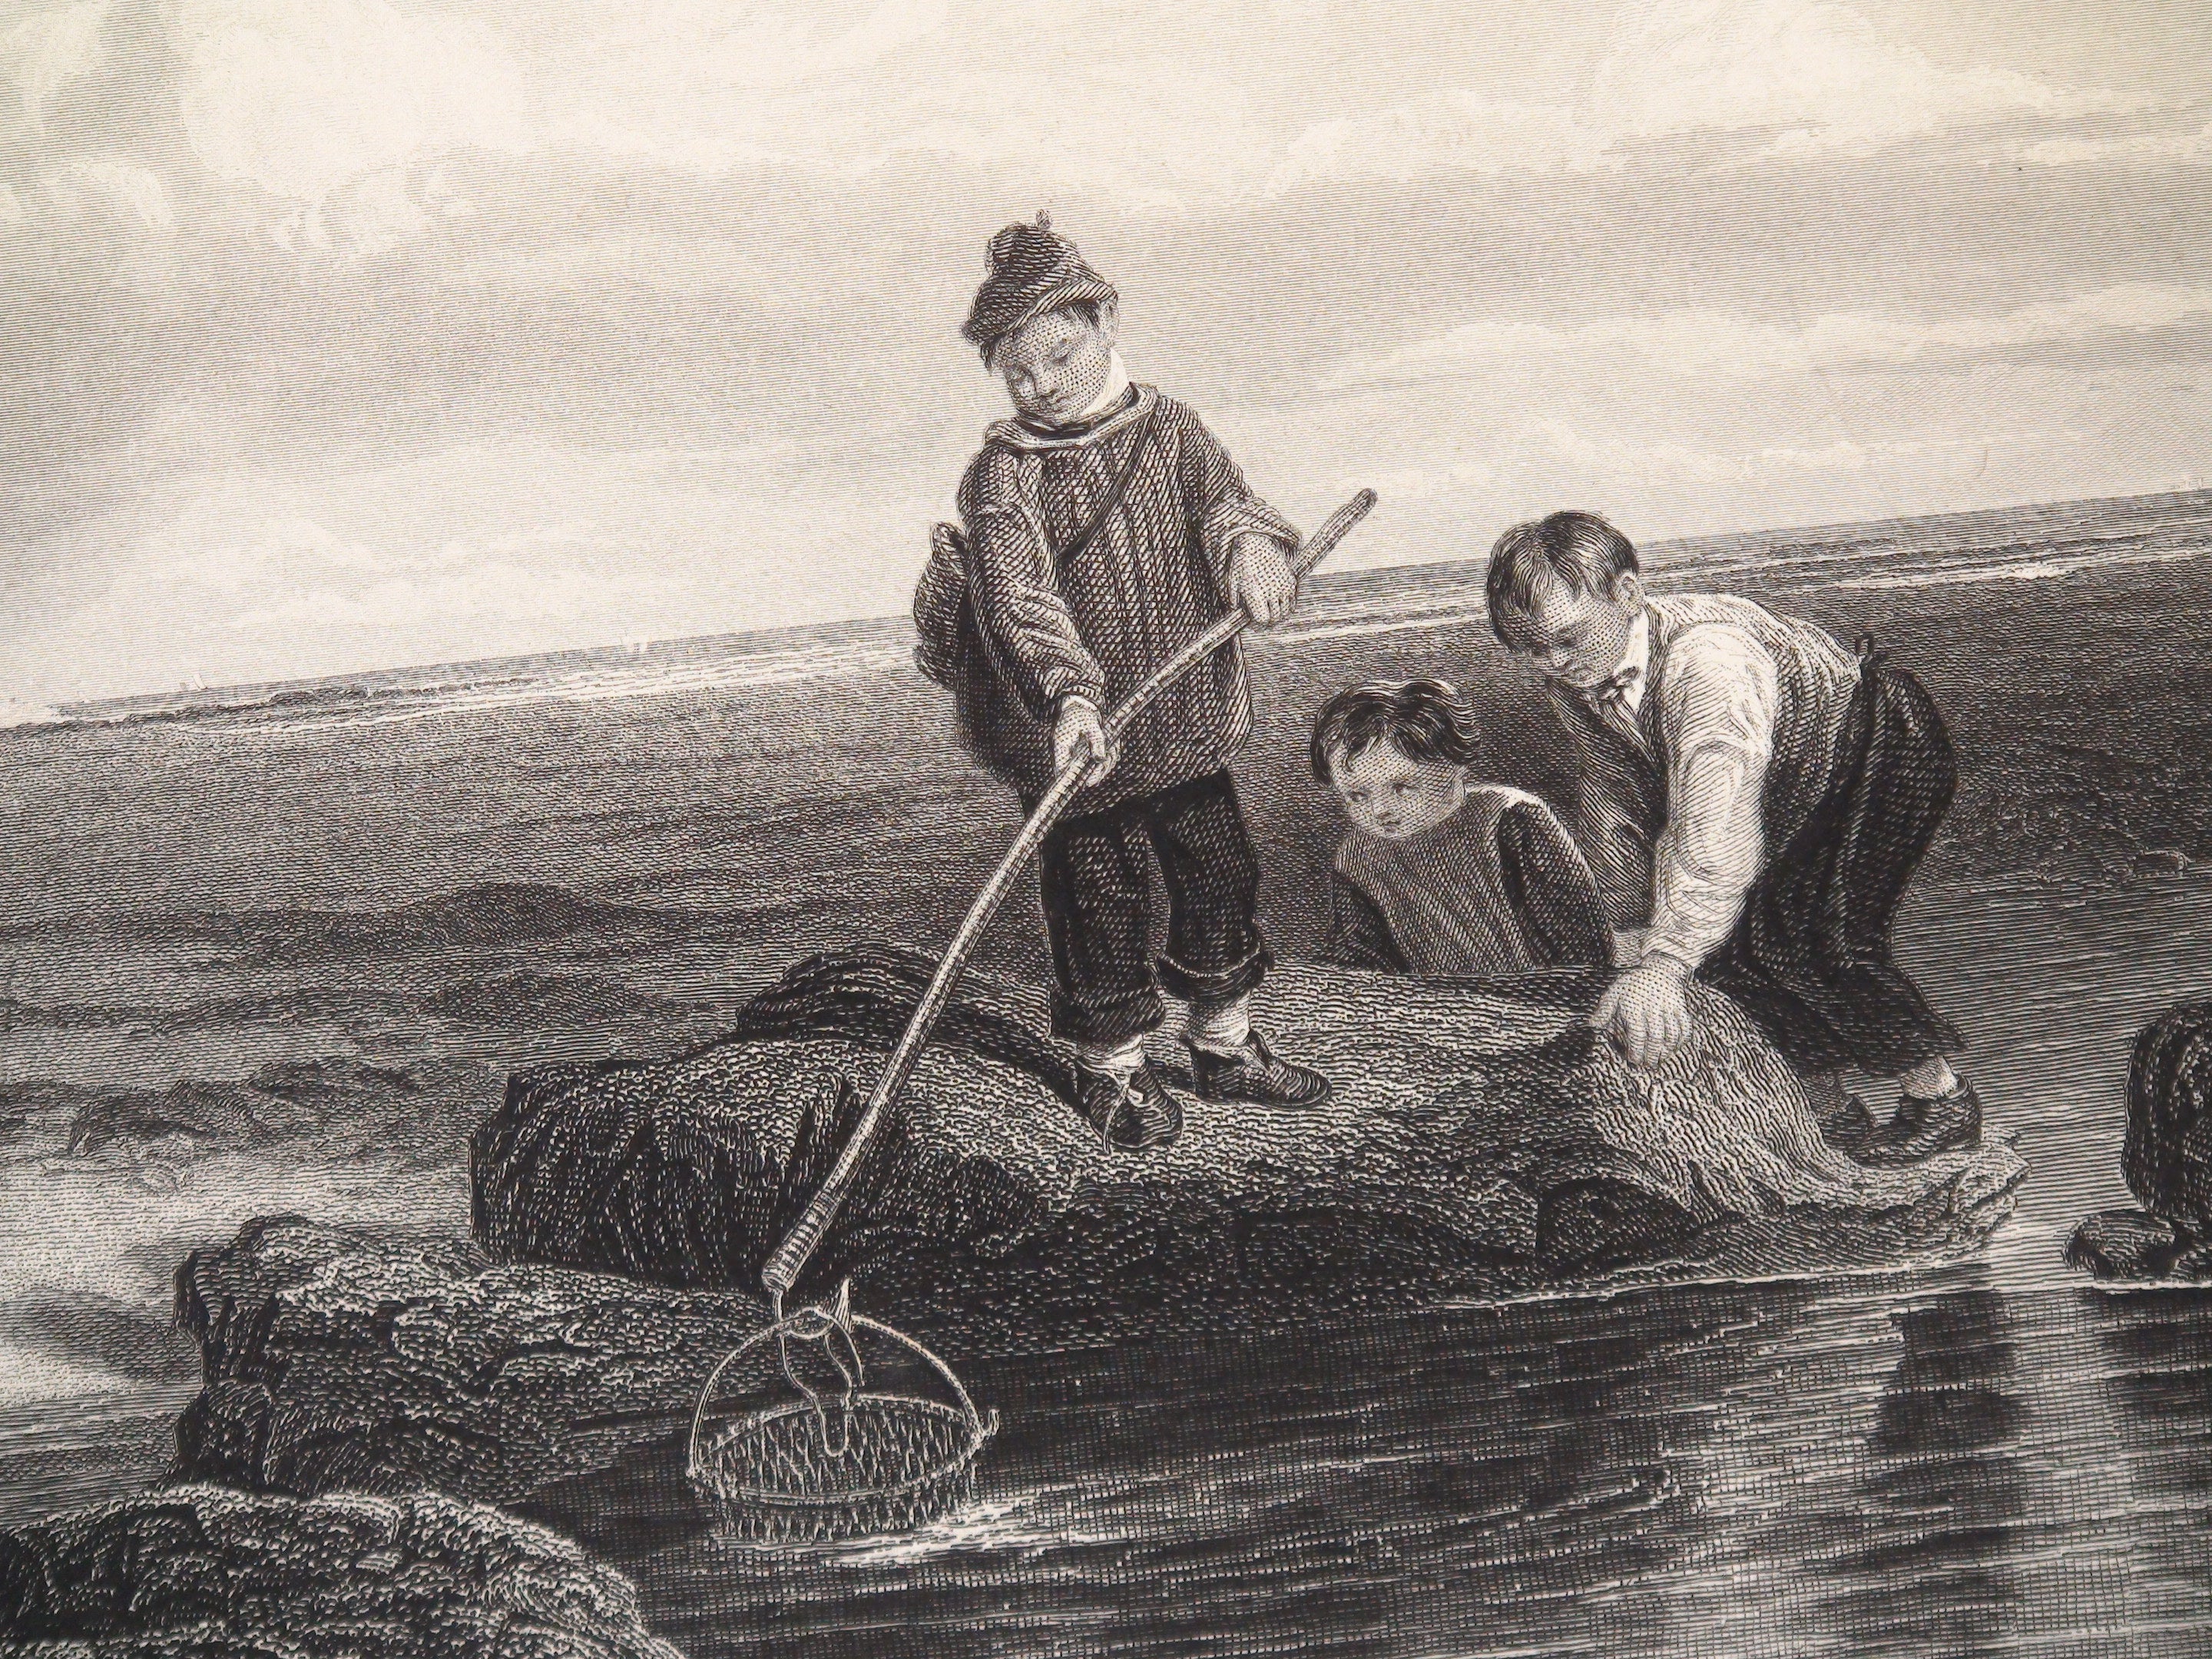 The Prawn Fishers by W. Collins, Steel Engraving by J. T. Willmore, 1860